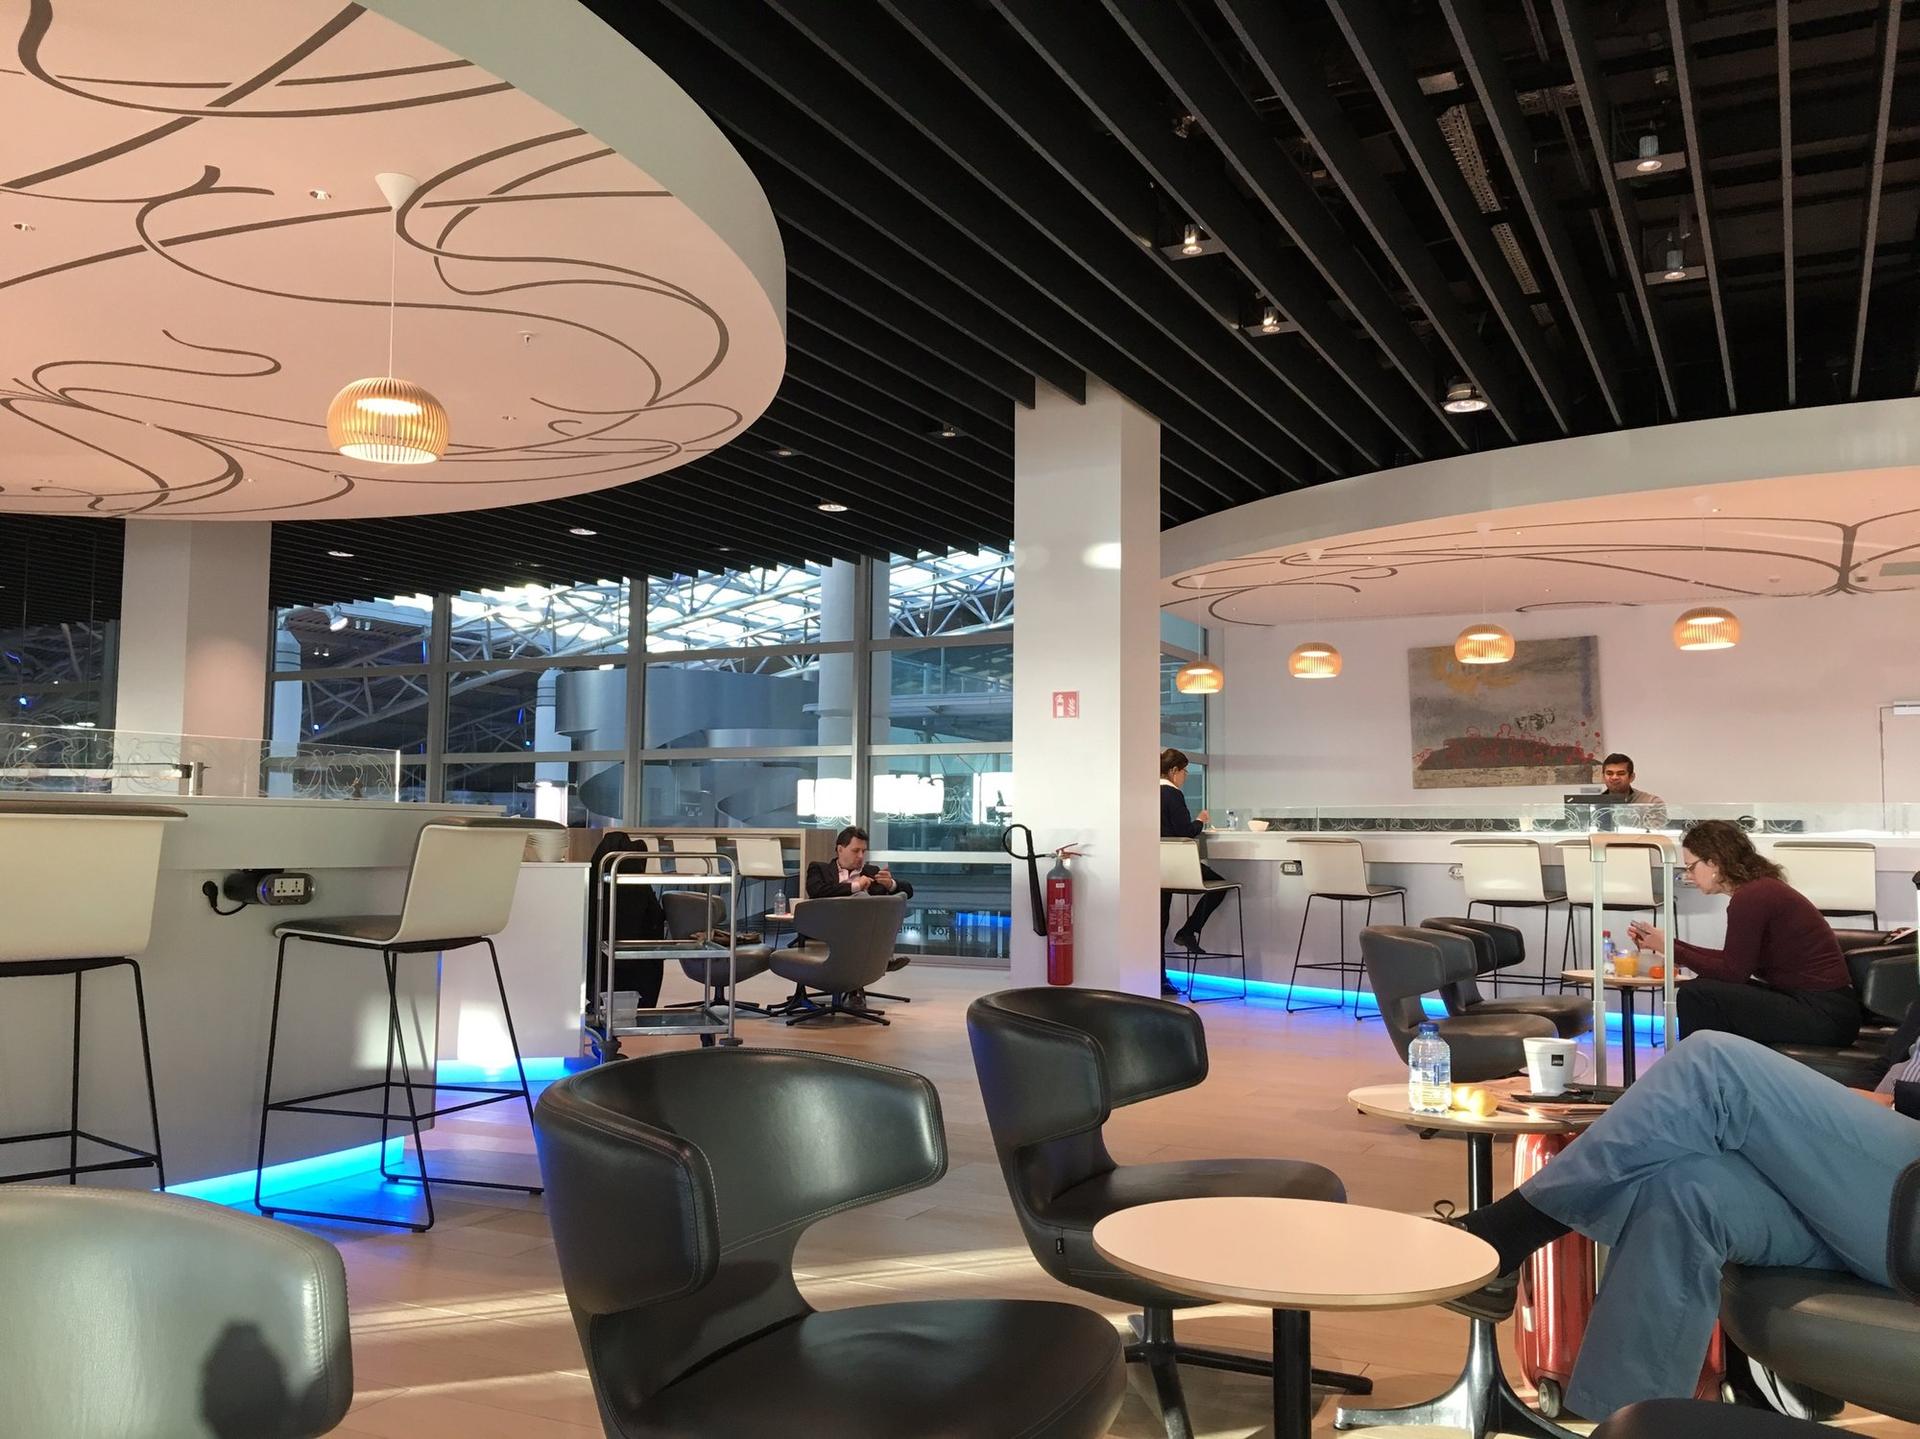 The Loft by Brussels Airlines and Lounge by Lexus image 14 of 23